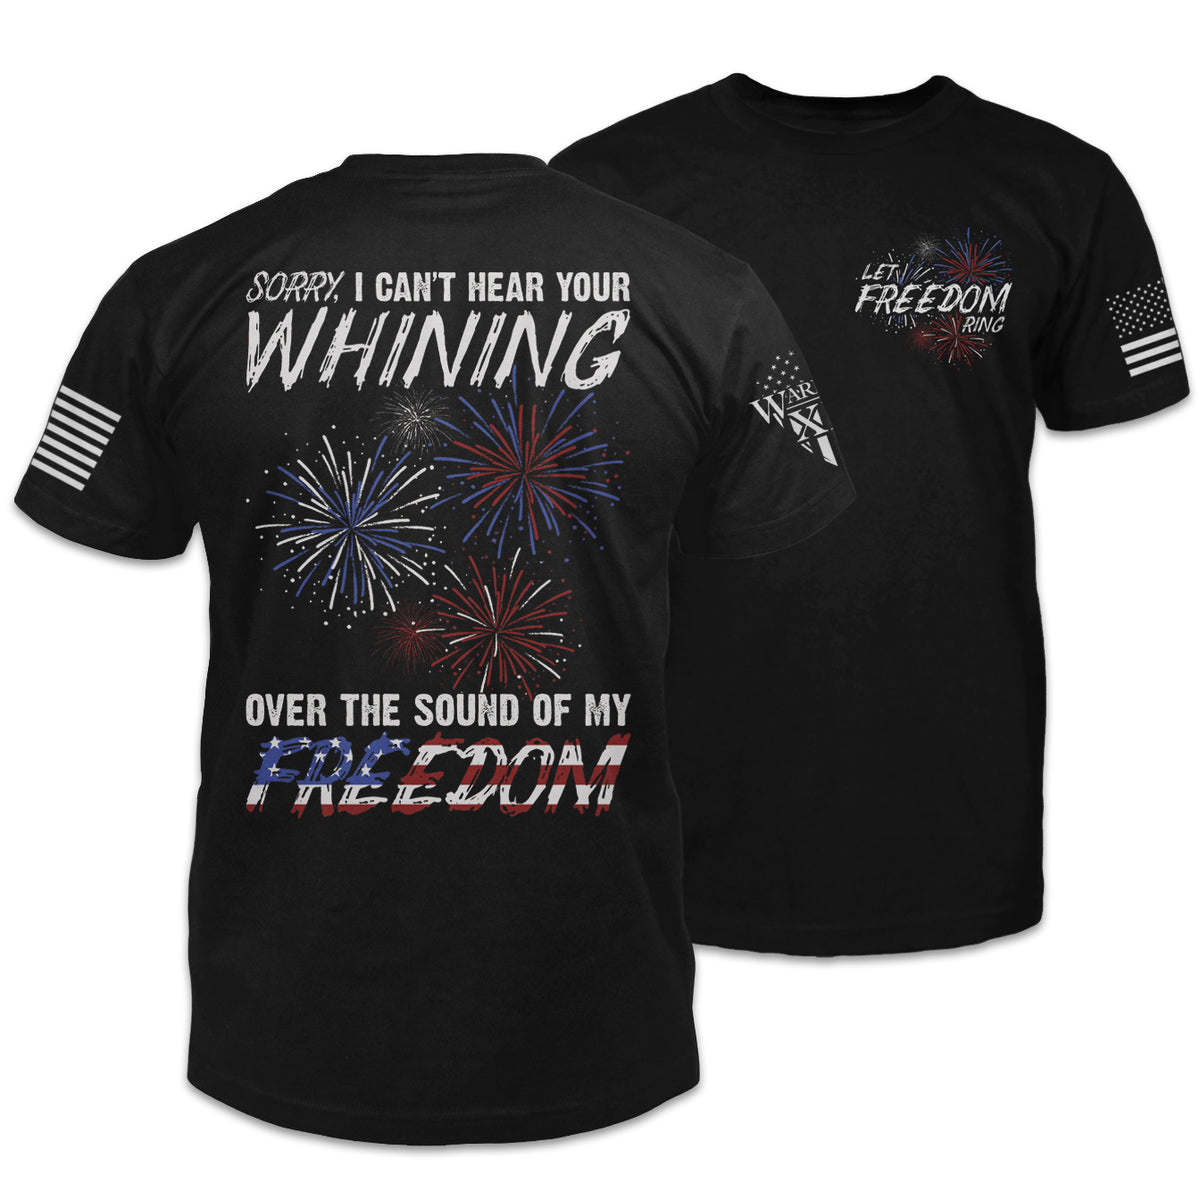 Front & back black t-shirt with the words "Sorry, I can't hear your whining over the sound of my freedom." with exploding fireworks printed on the shirt.